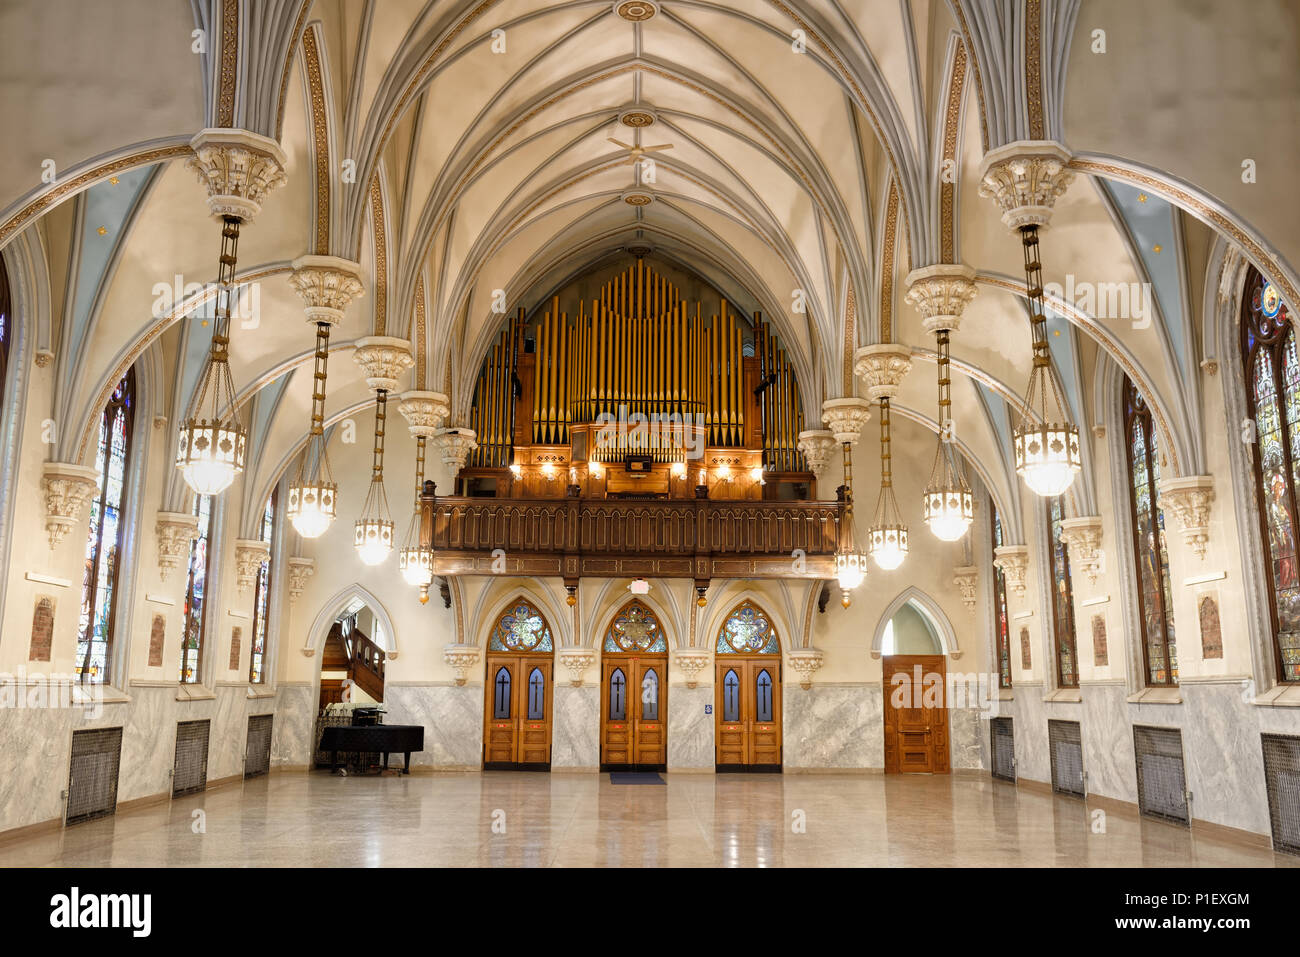 Church hall with stunning interior architecture, highly decorative vaulted ceiling arches, and pipe organ loft at rear, antique building circa 1904. Stock Photo